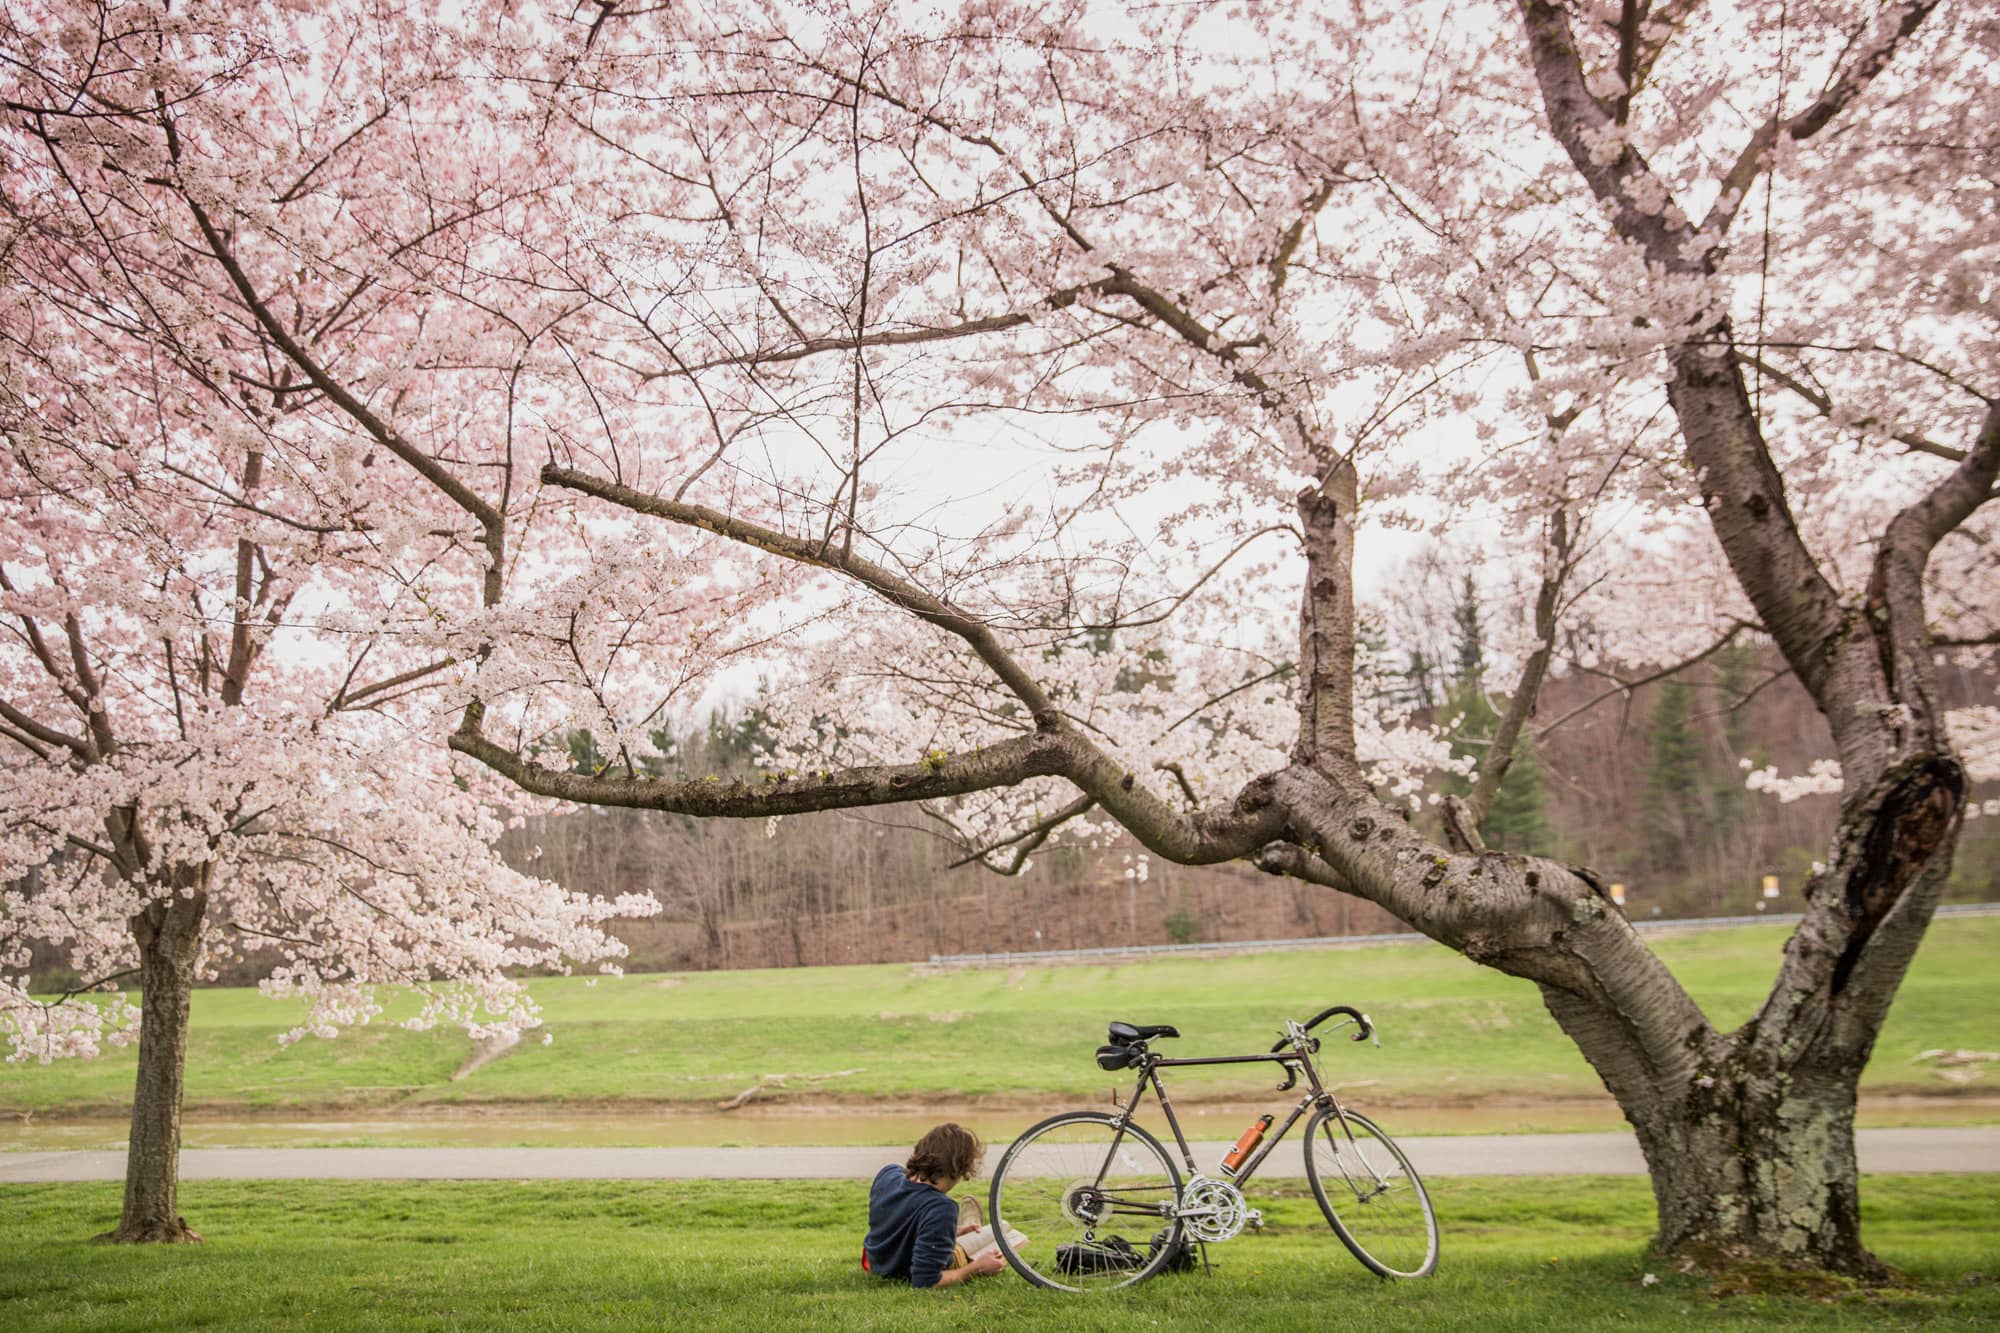 A cyclist stops to enjoy the cherry blossoms in bloom along banks of the Hocking River in Athens.